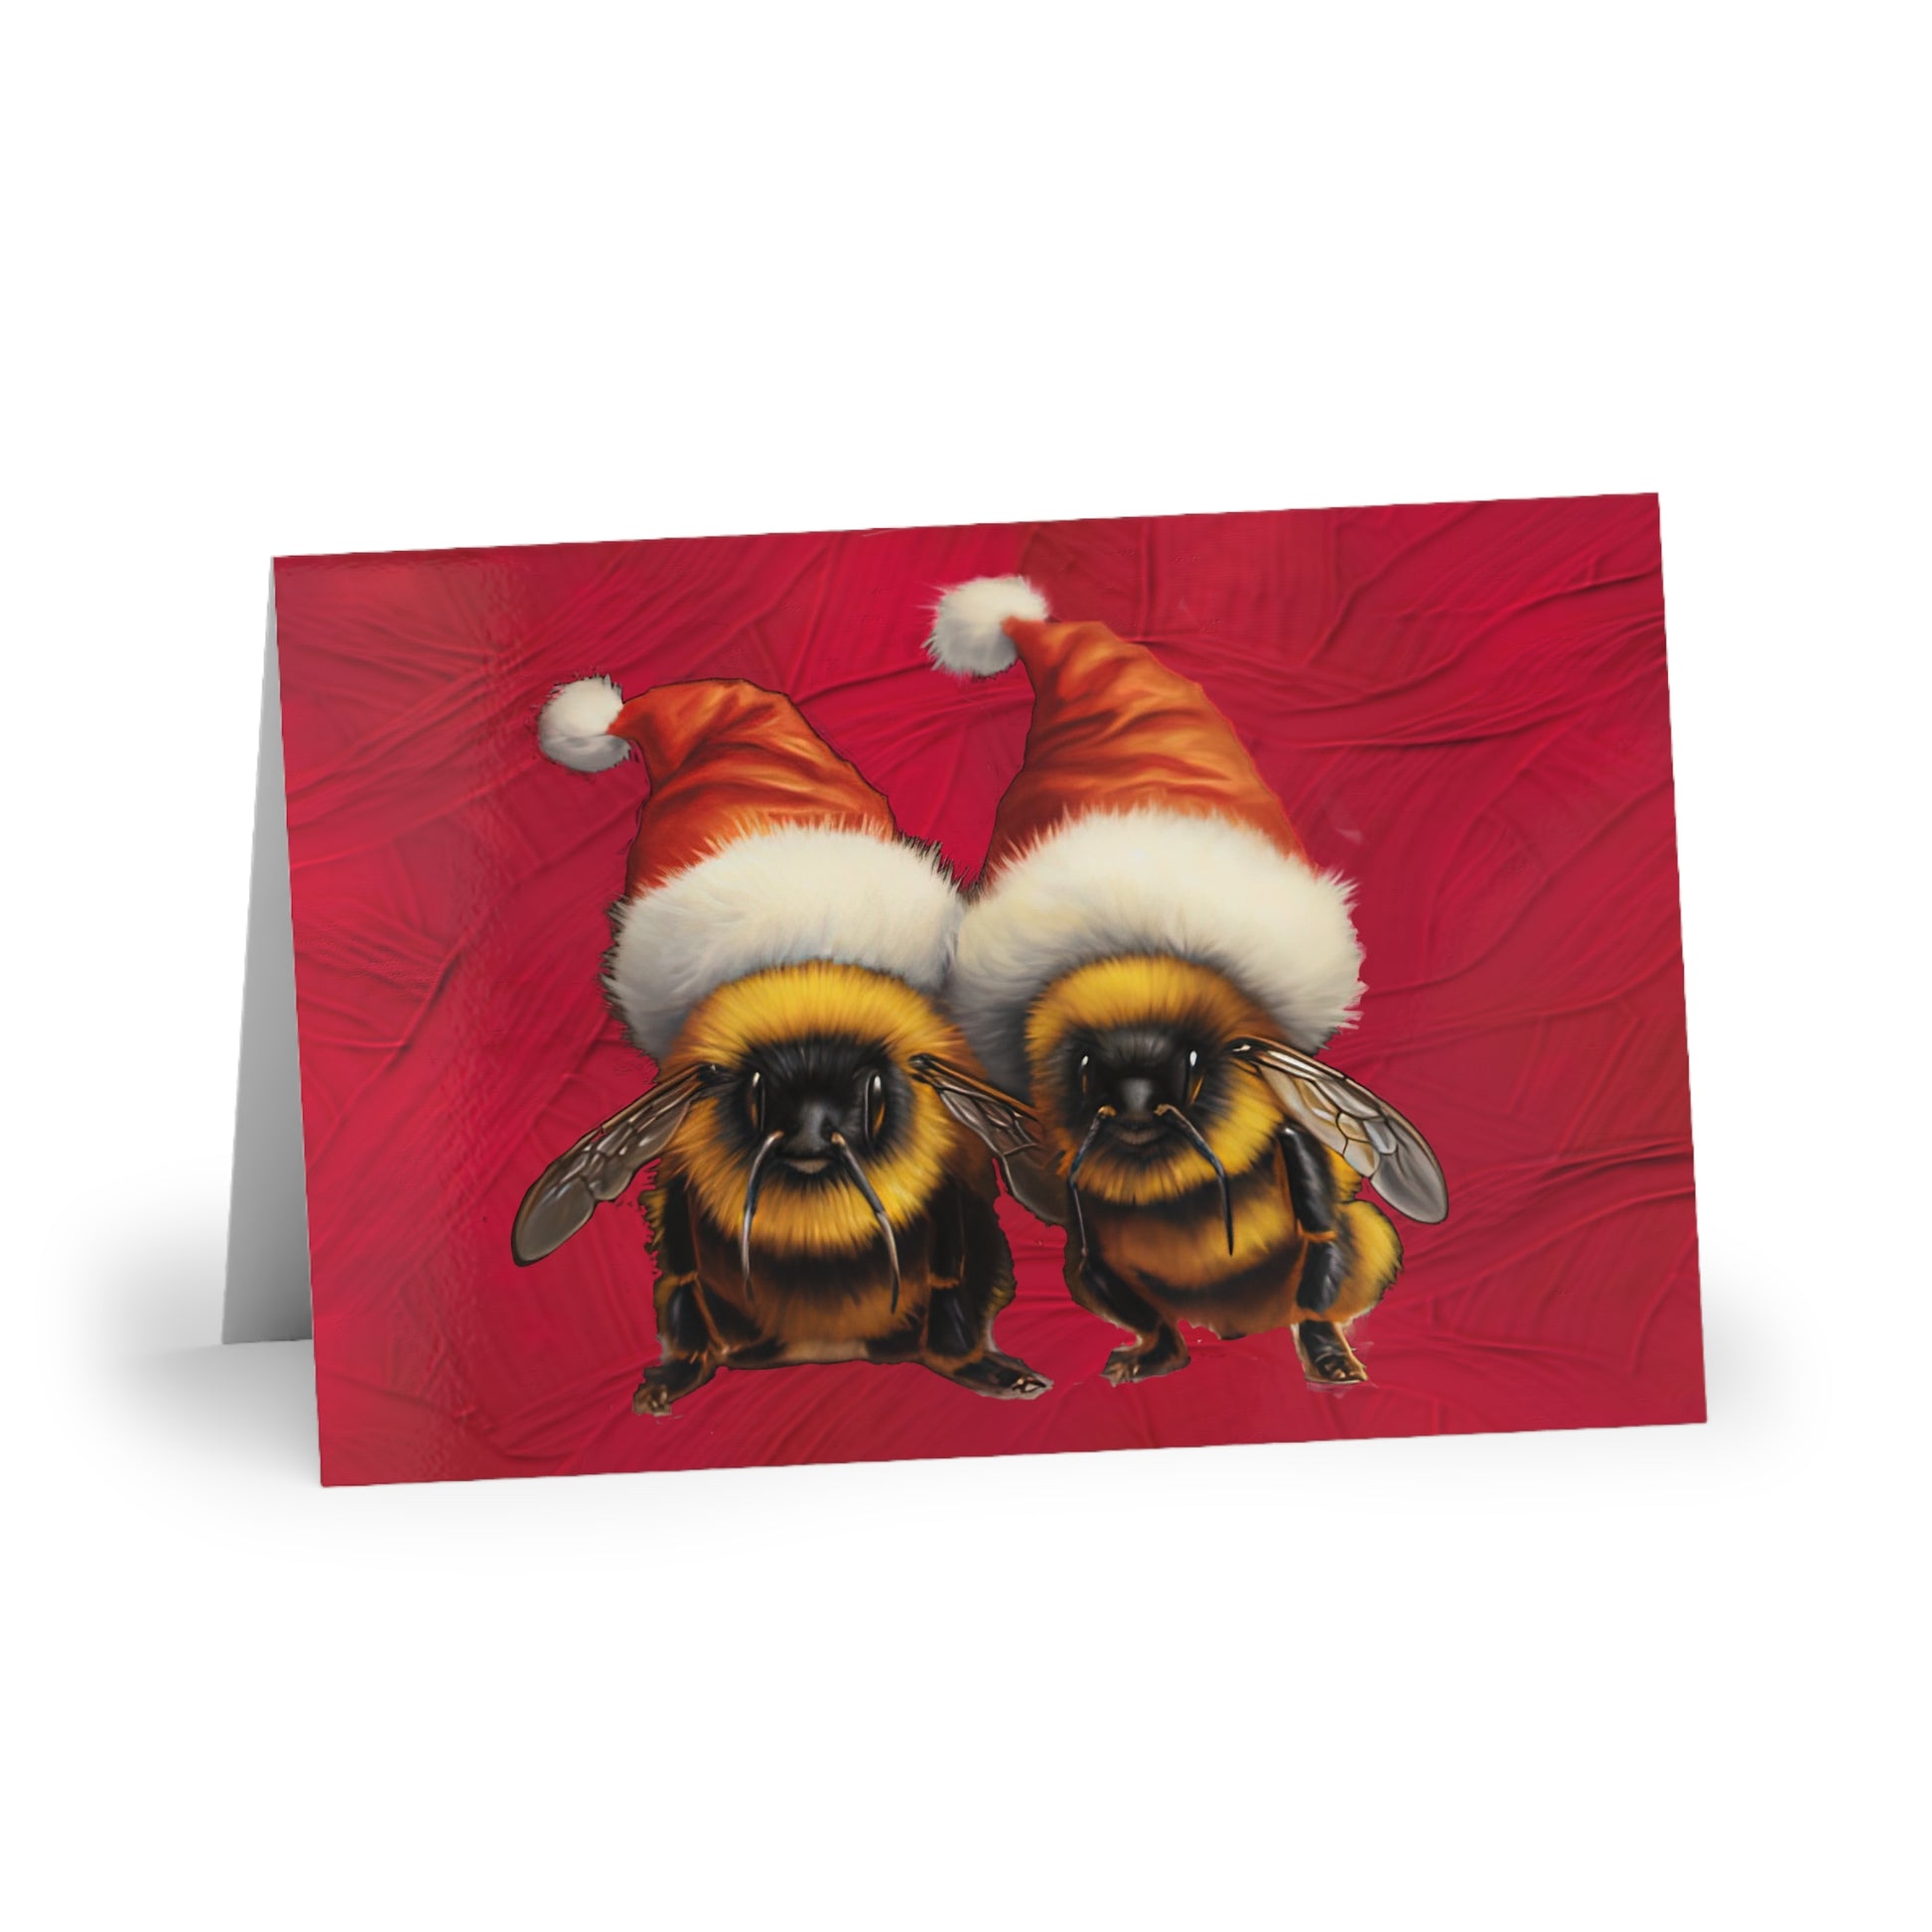 Bumble Bees with Santa hats (1 or 10-pcs) Paper products holiday store